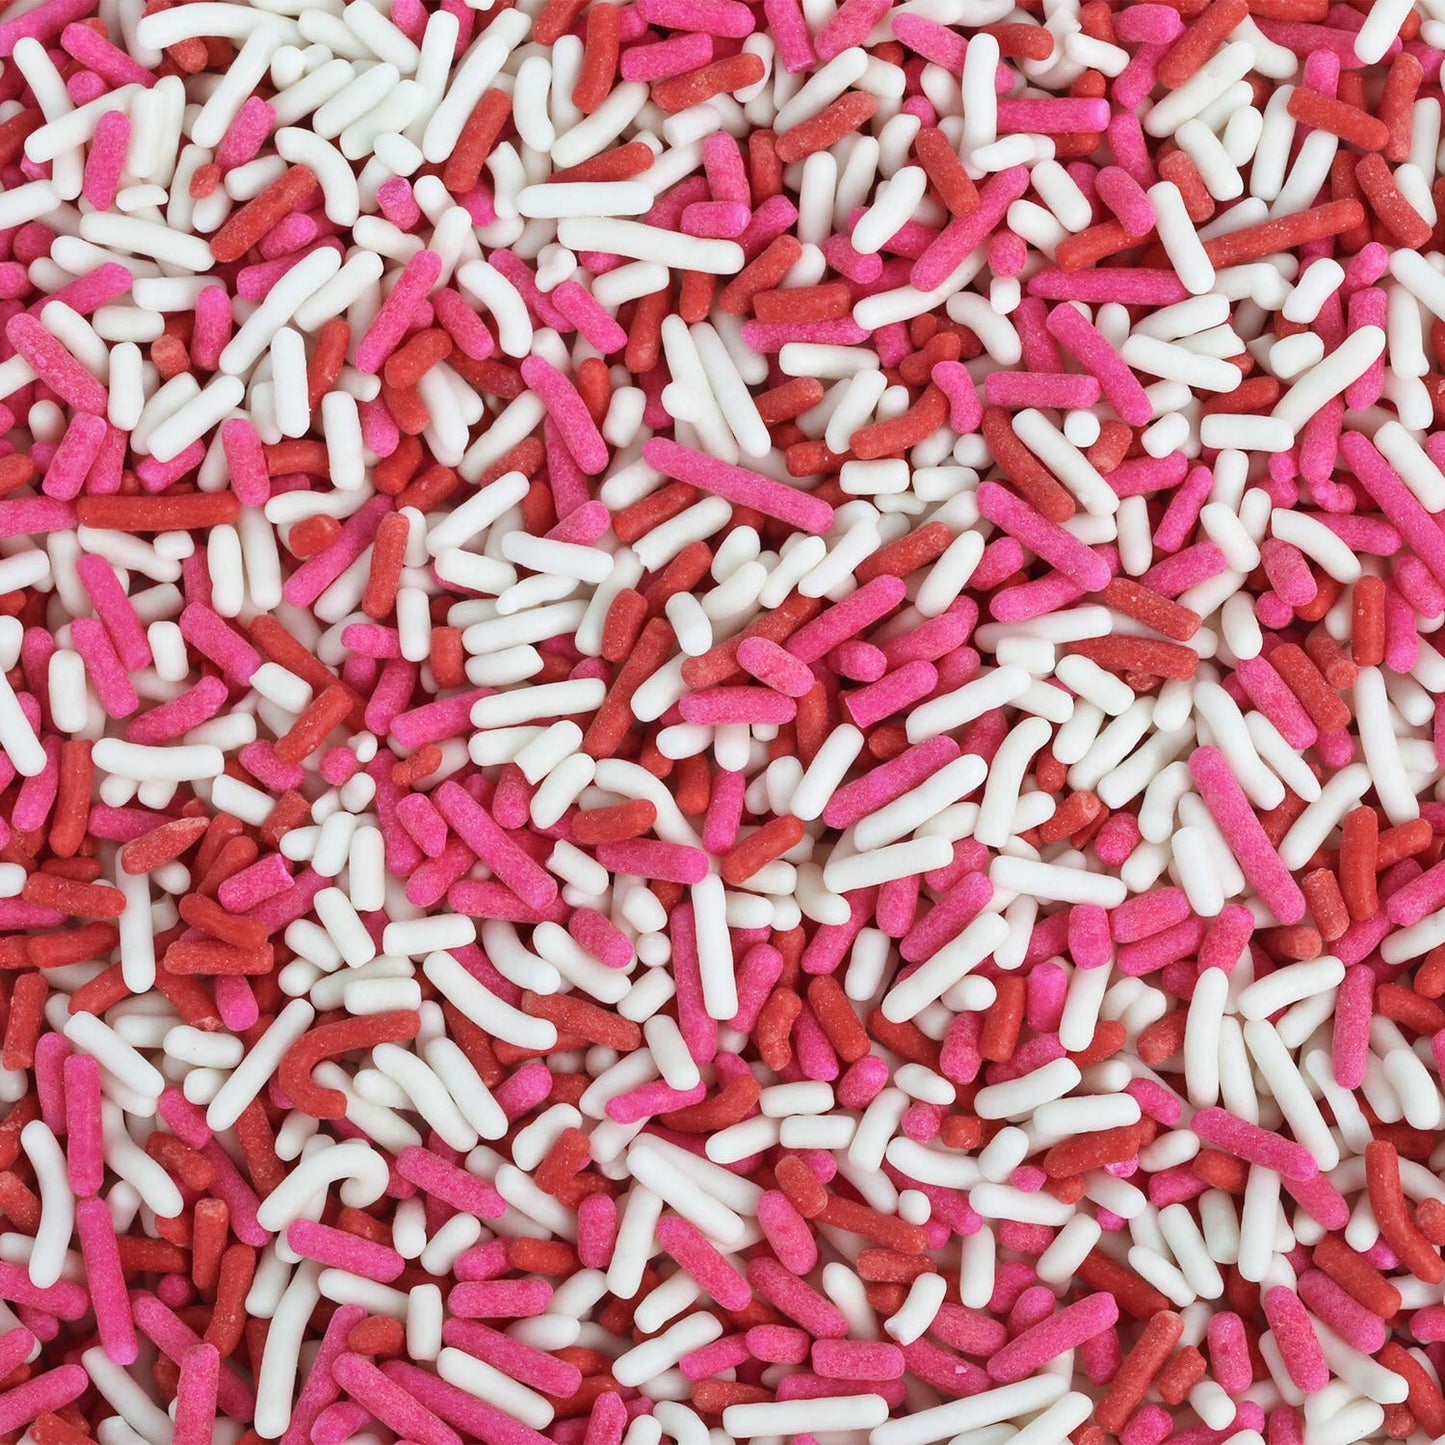 Princess Sprinkles - 2.2 LB - A Great Surprise Sprinkles - Red, Pink & White Sprinkles - Bulk Jimmies for Cupcakes, Cookies, Ice Cream and More